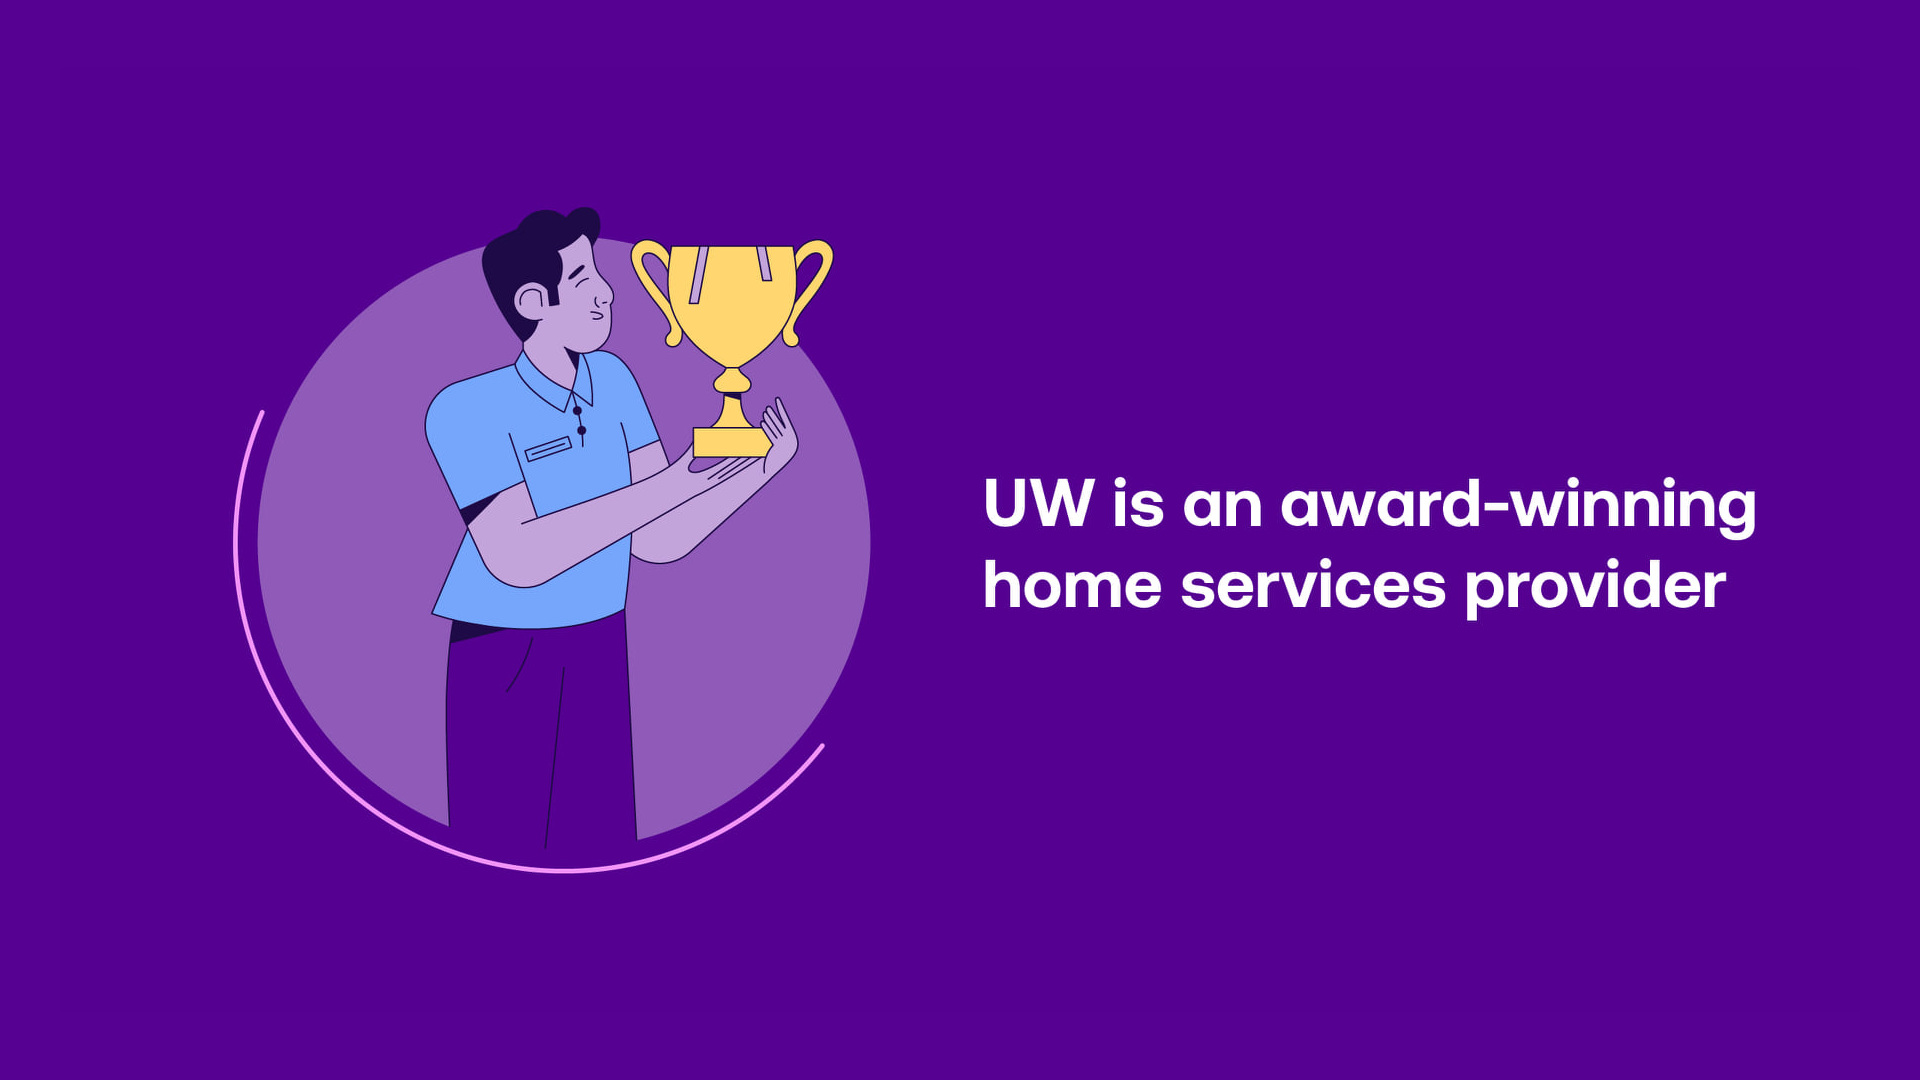 Utility Warehouse services are award winning